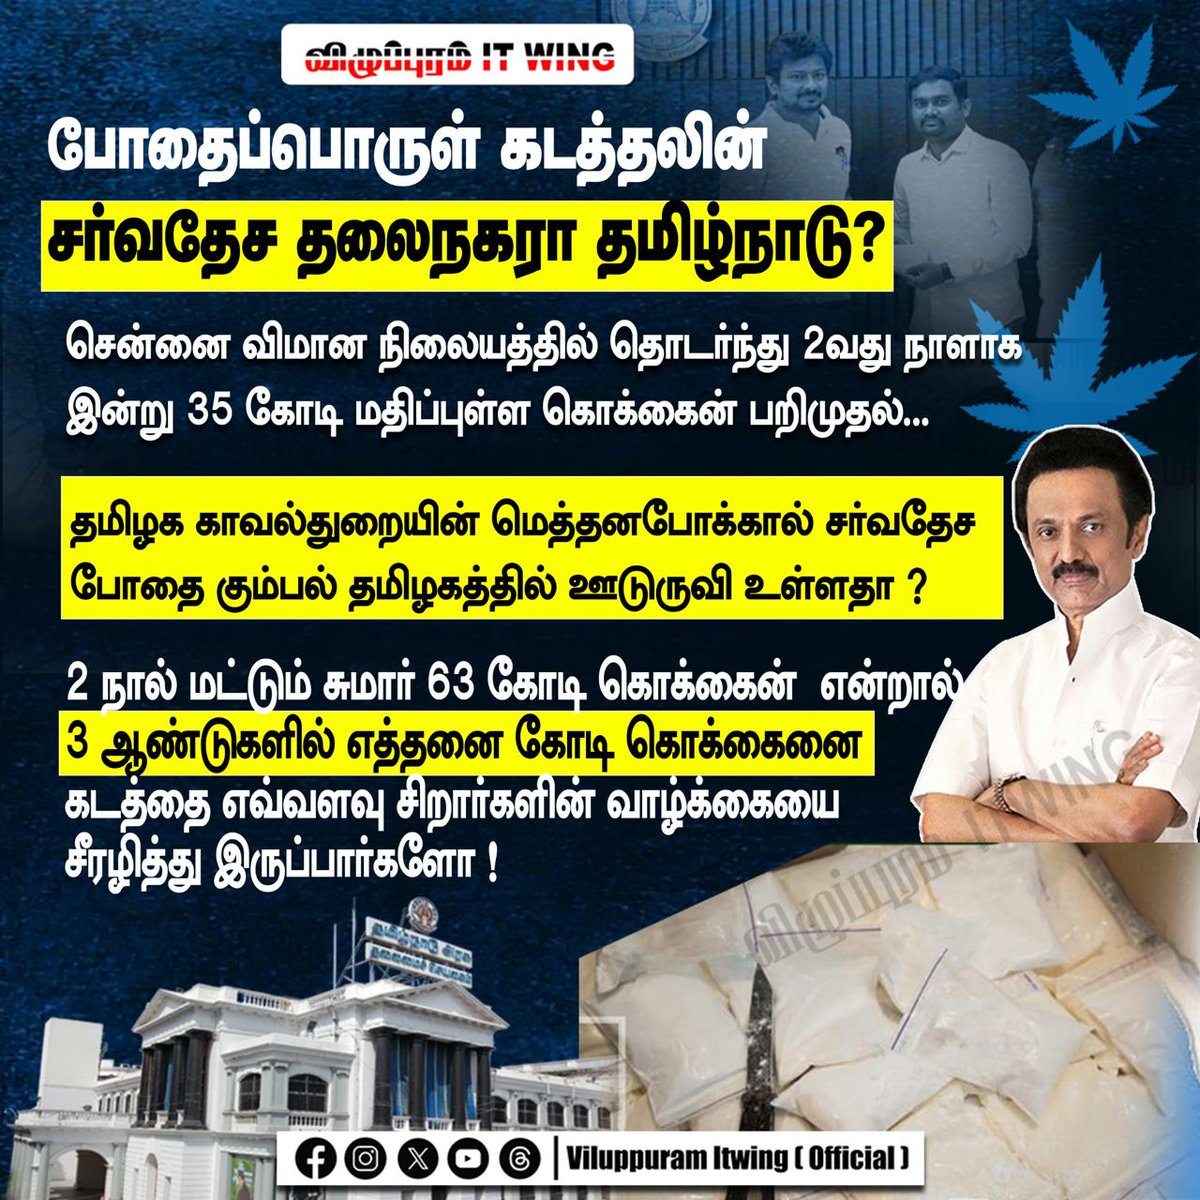 #ADMK_VPM
@VPM_ITWING